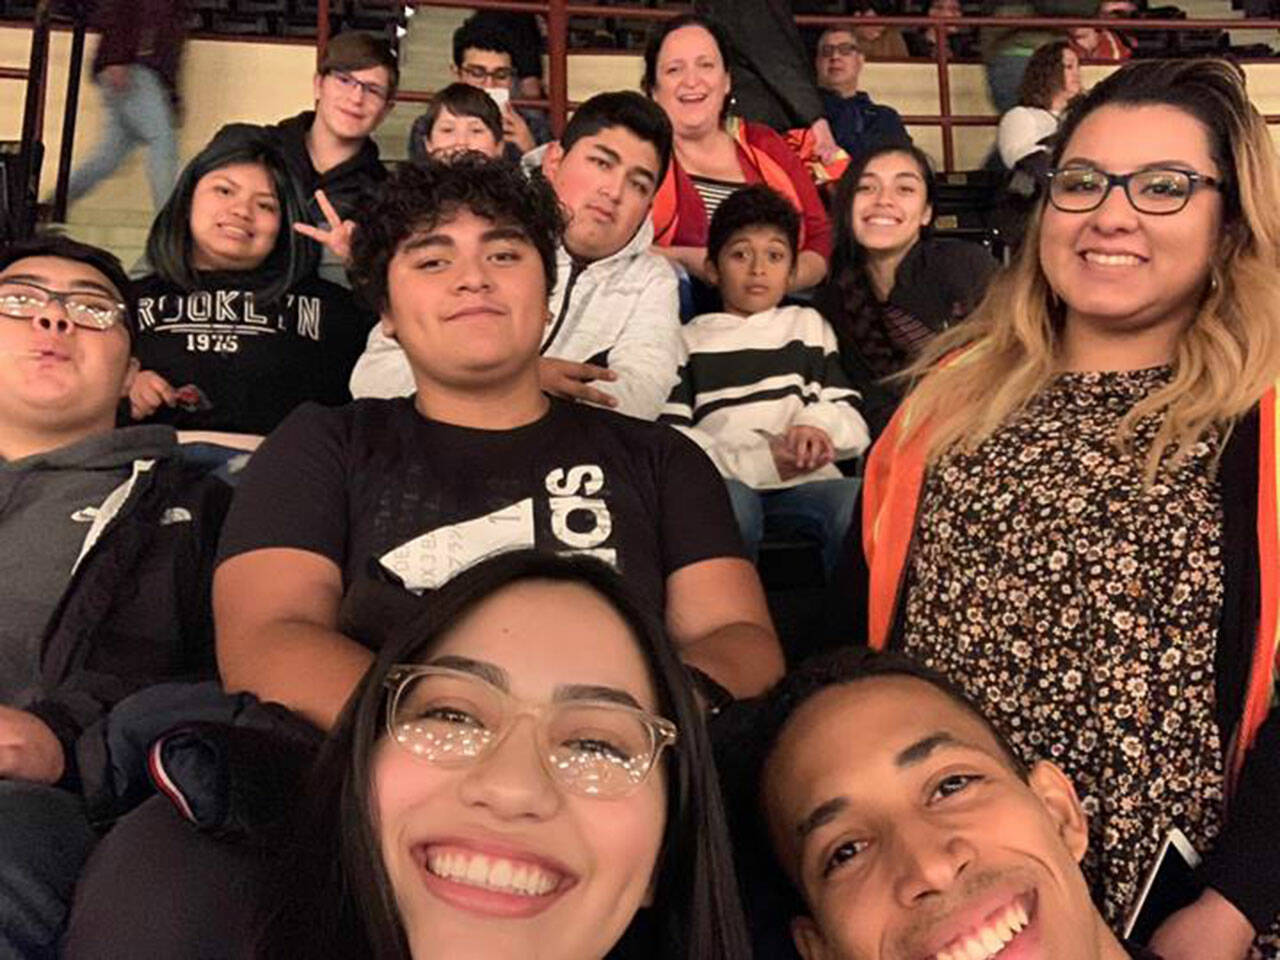 (Courtesy Photo) Pre-pandemic, Alejandra Tres (back row, center) organized the opportunity for Vashon and other regional Latino youth leaders to not only watch the one-man show “Latin History for Morons” but also get to meet with the actor, John Leguizamo, in a small group to discuss Latino history and pride.